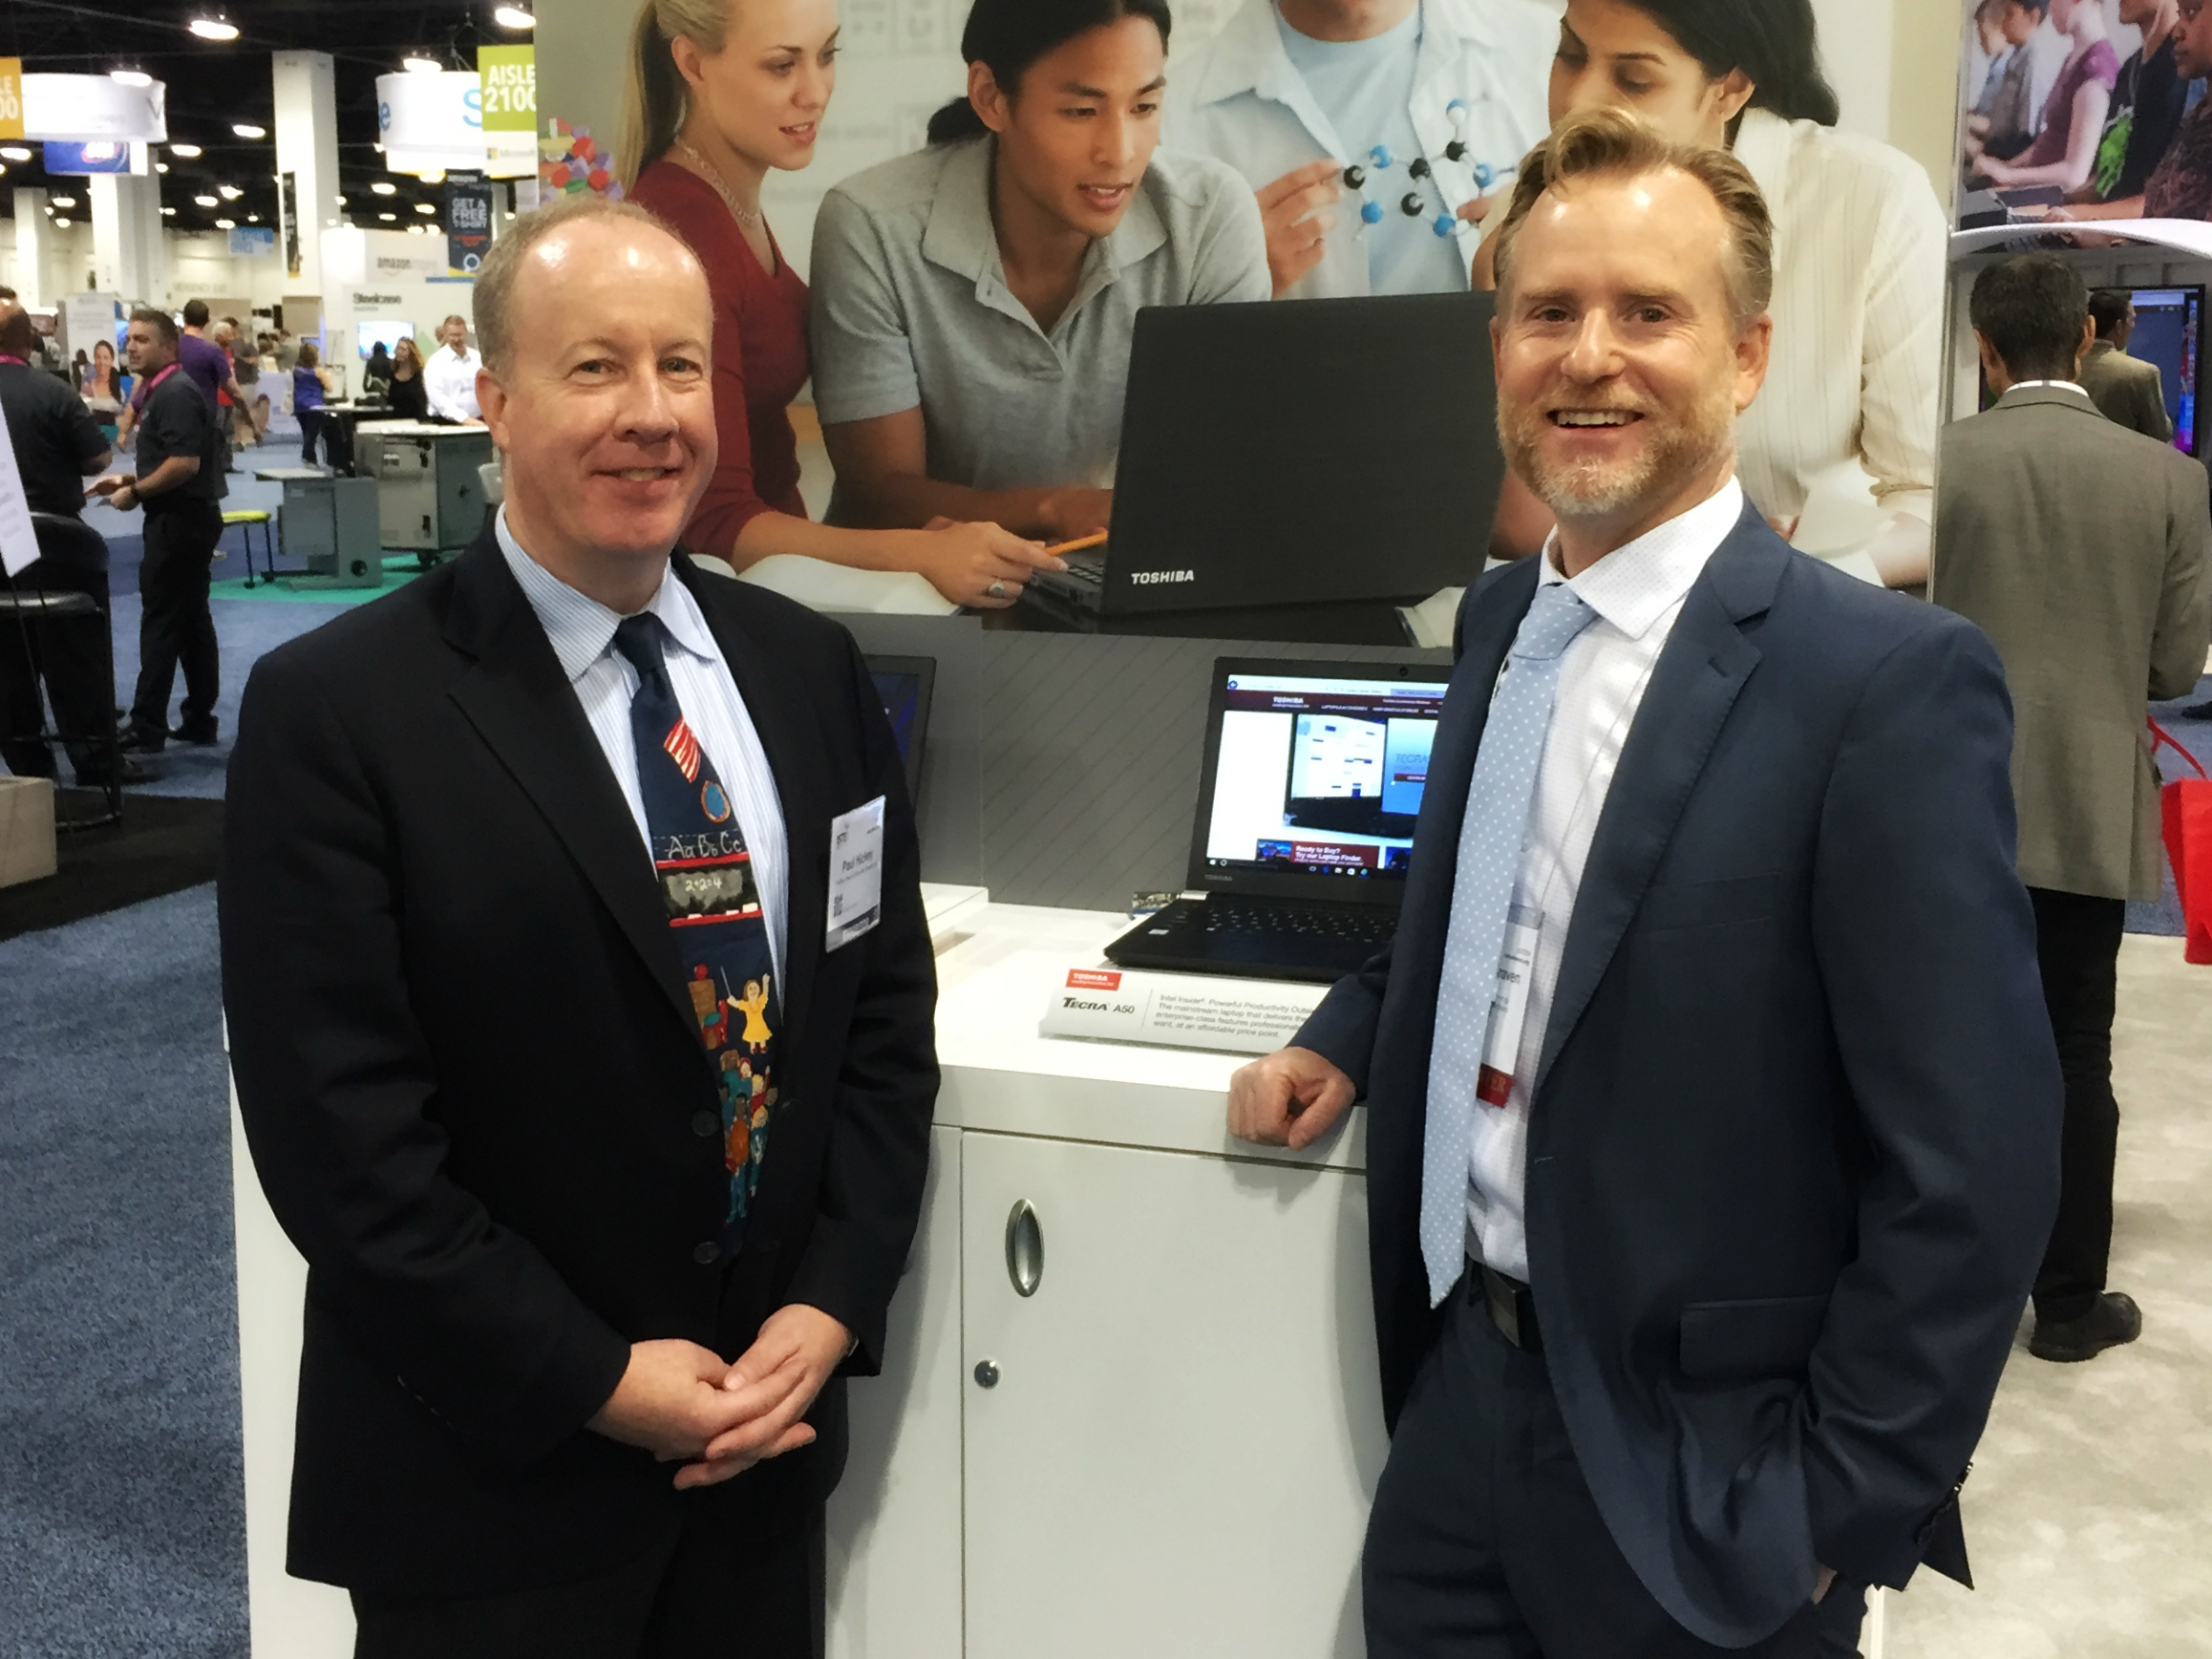 An image showing Paul Hickey, Toshiba's director of sales, and TUSD IT Senior Director Robert Craven